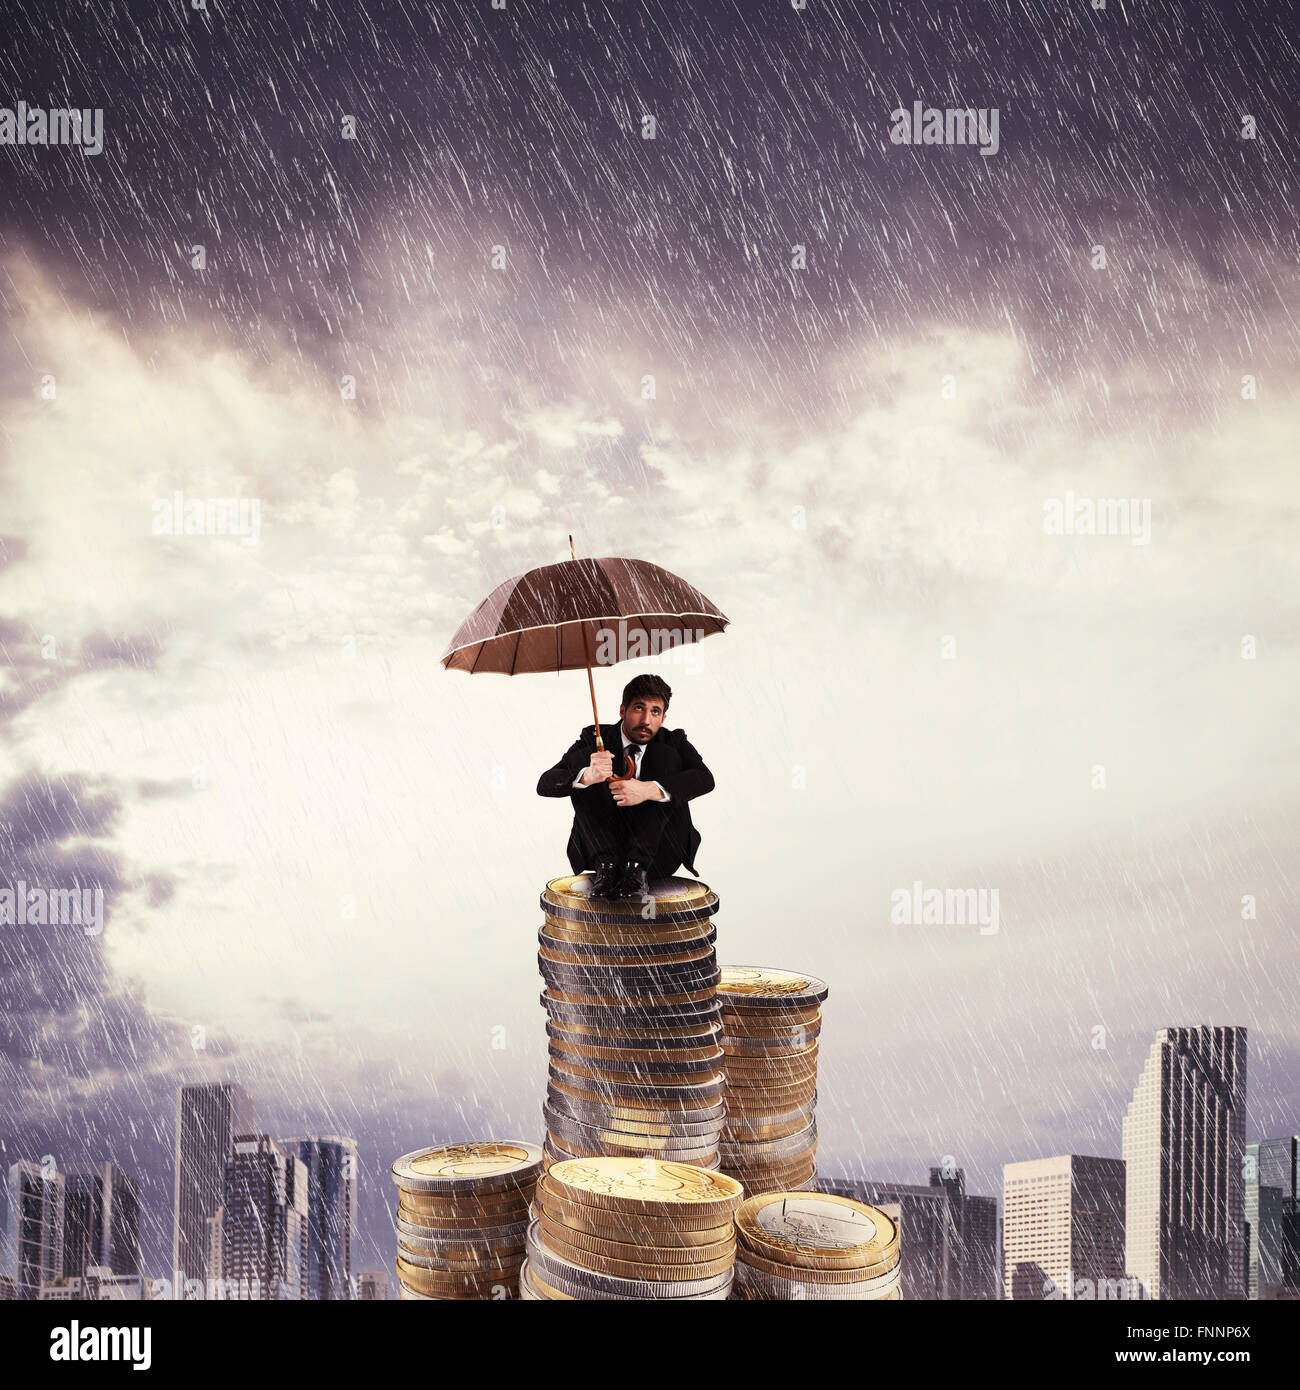 Lonely with savings Stock Photo